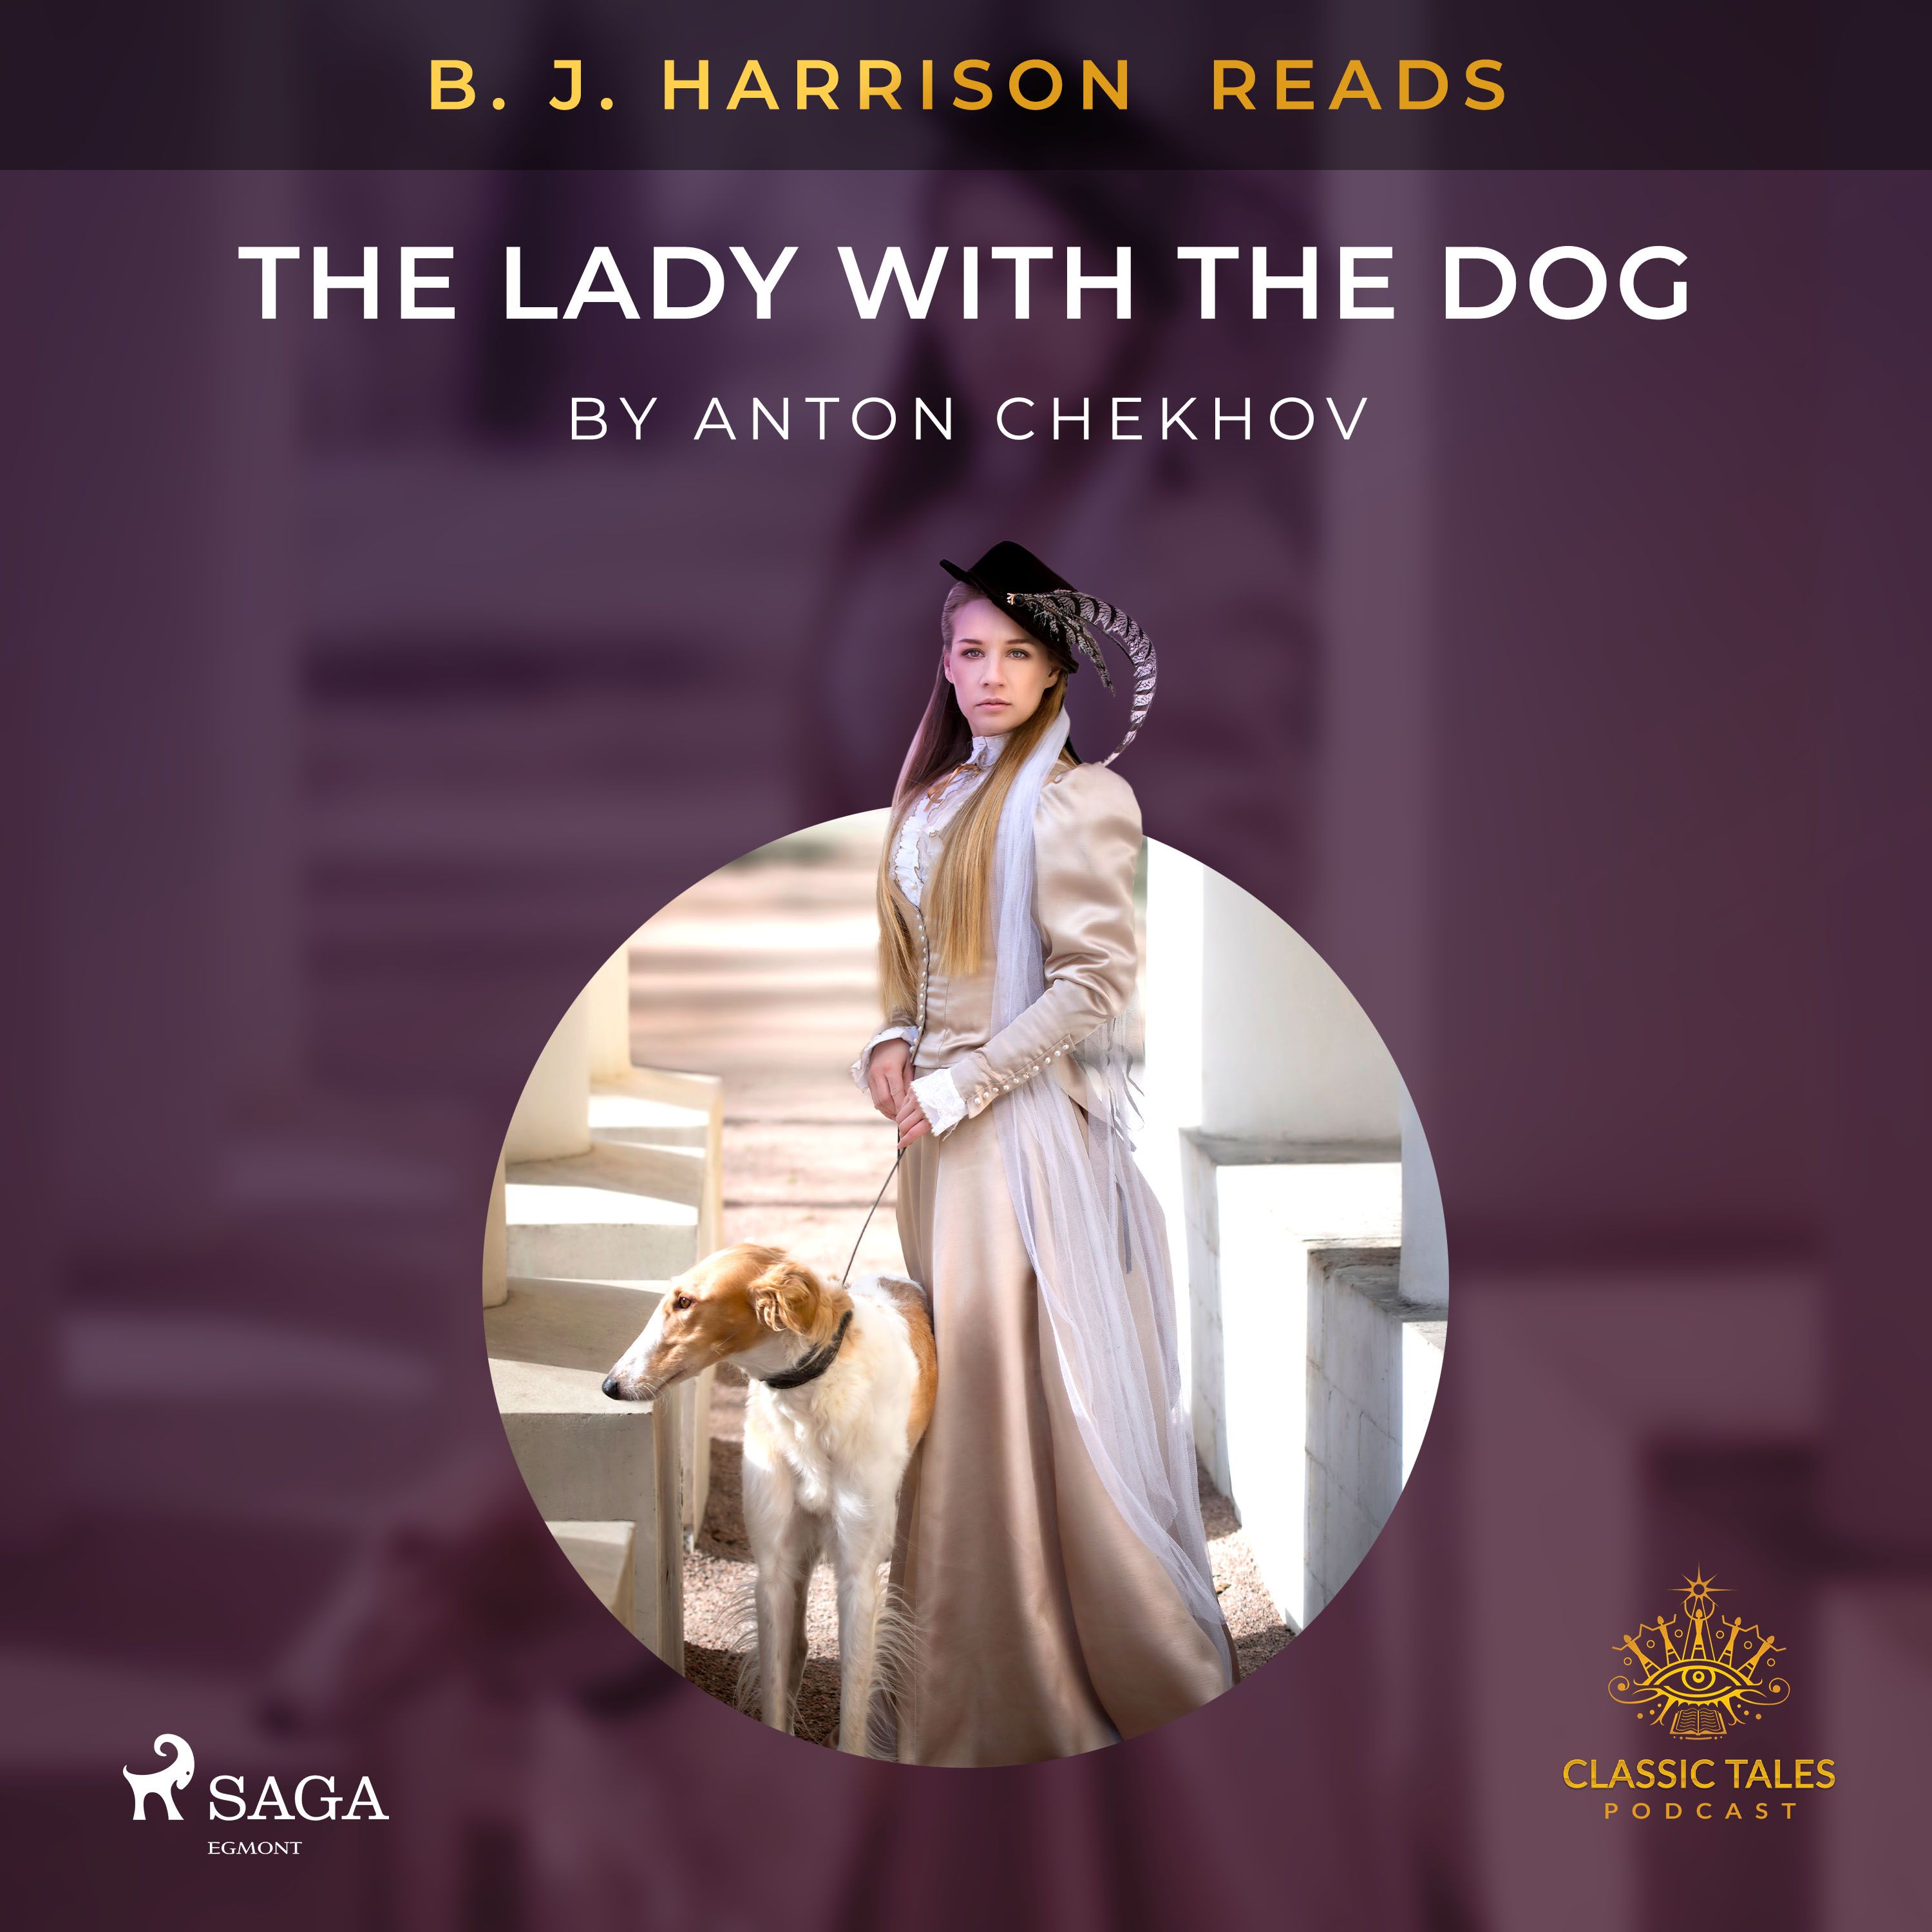 B. J. Harrison Reads The Lady With The Dog, audiobook by Anton Chekhov